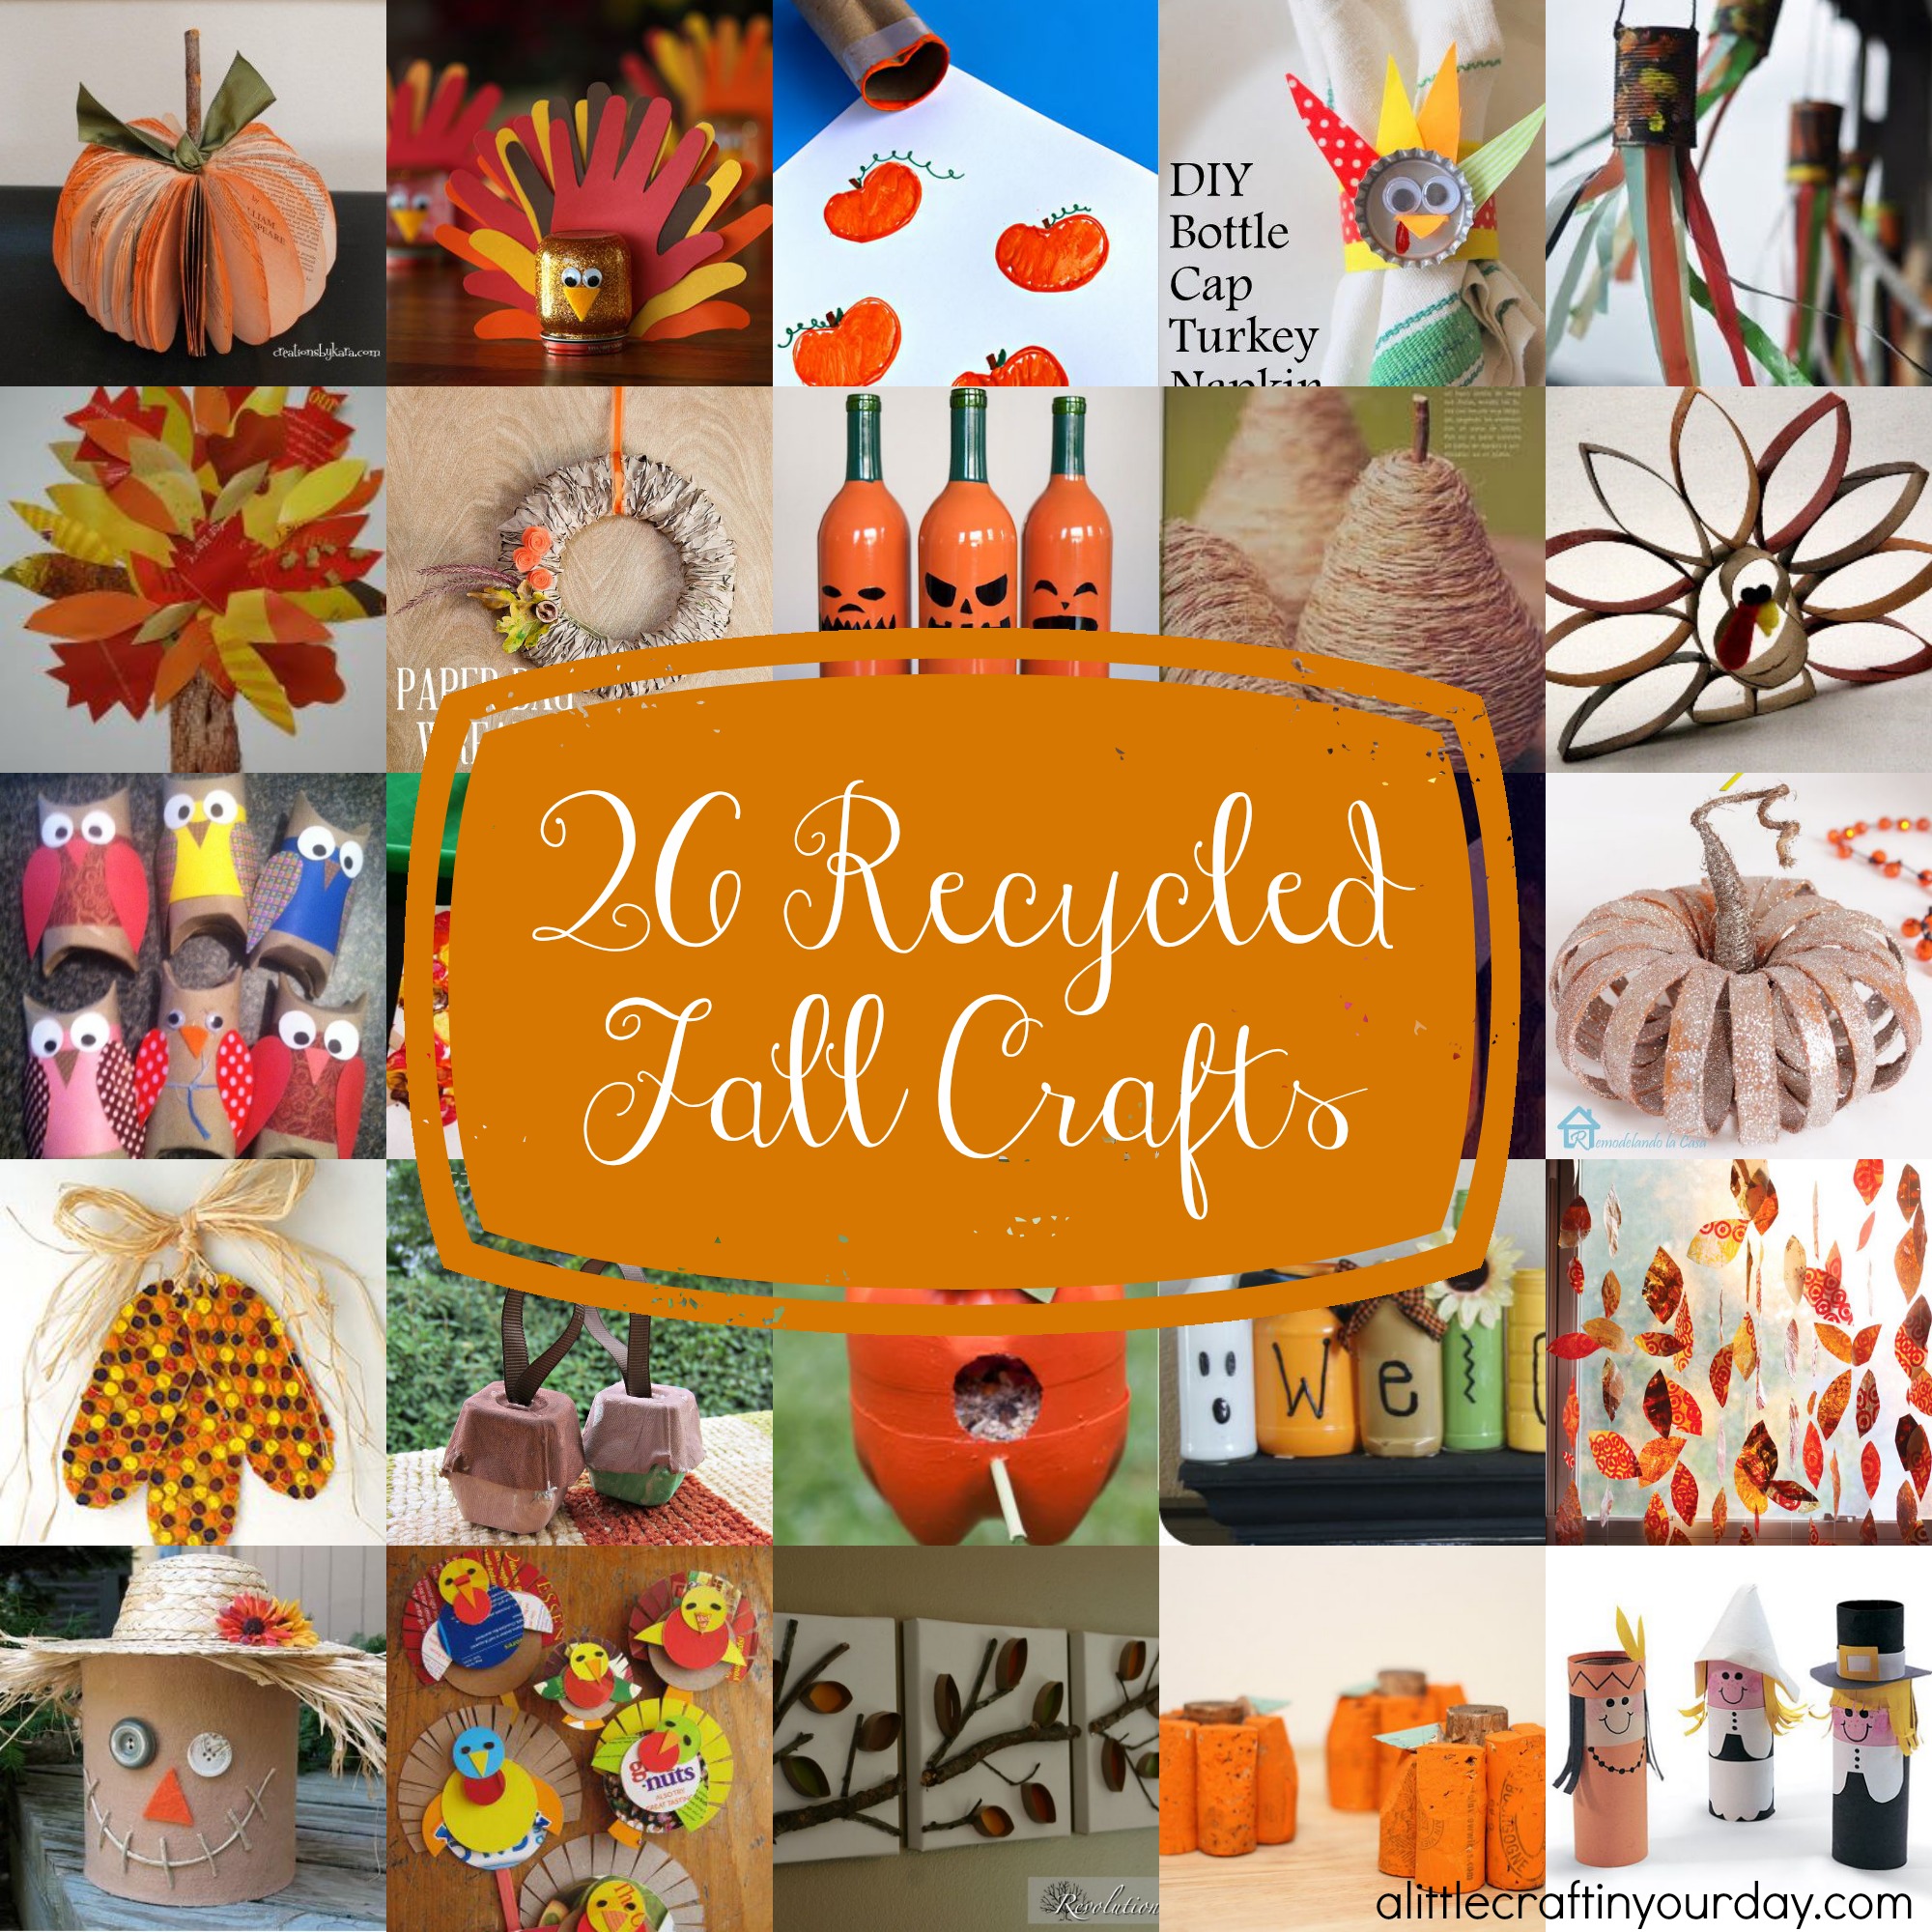 26 Recycled Fall Crafts - A Little Craft In Your Day